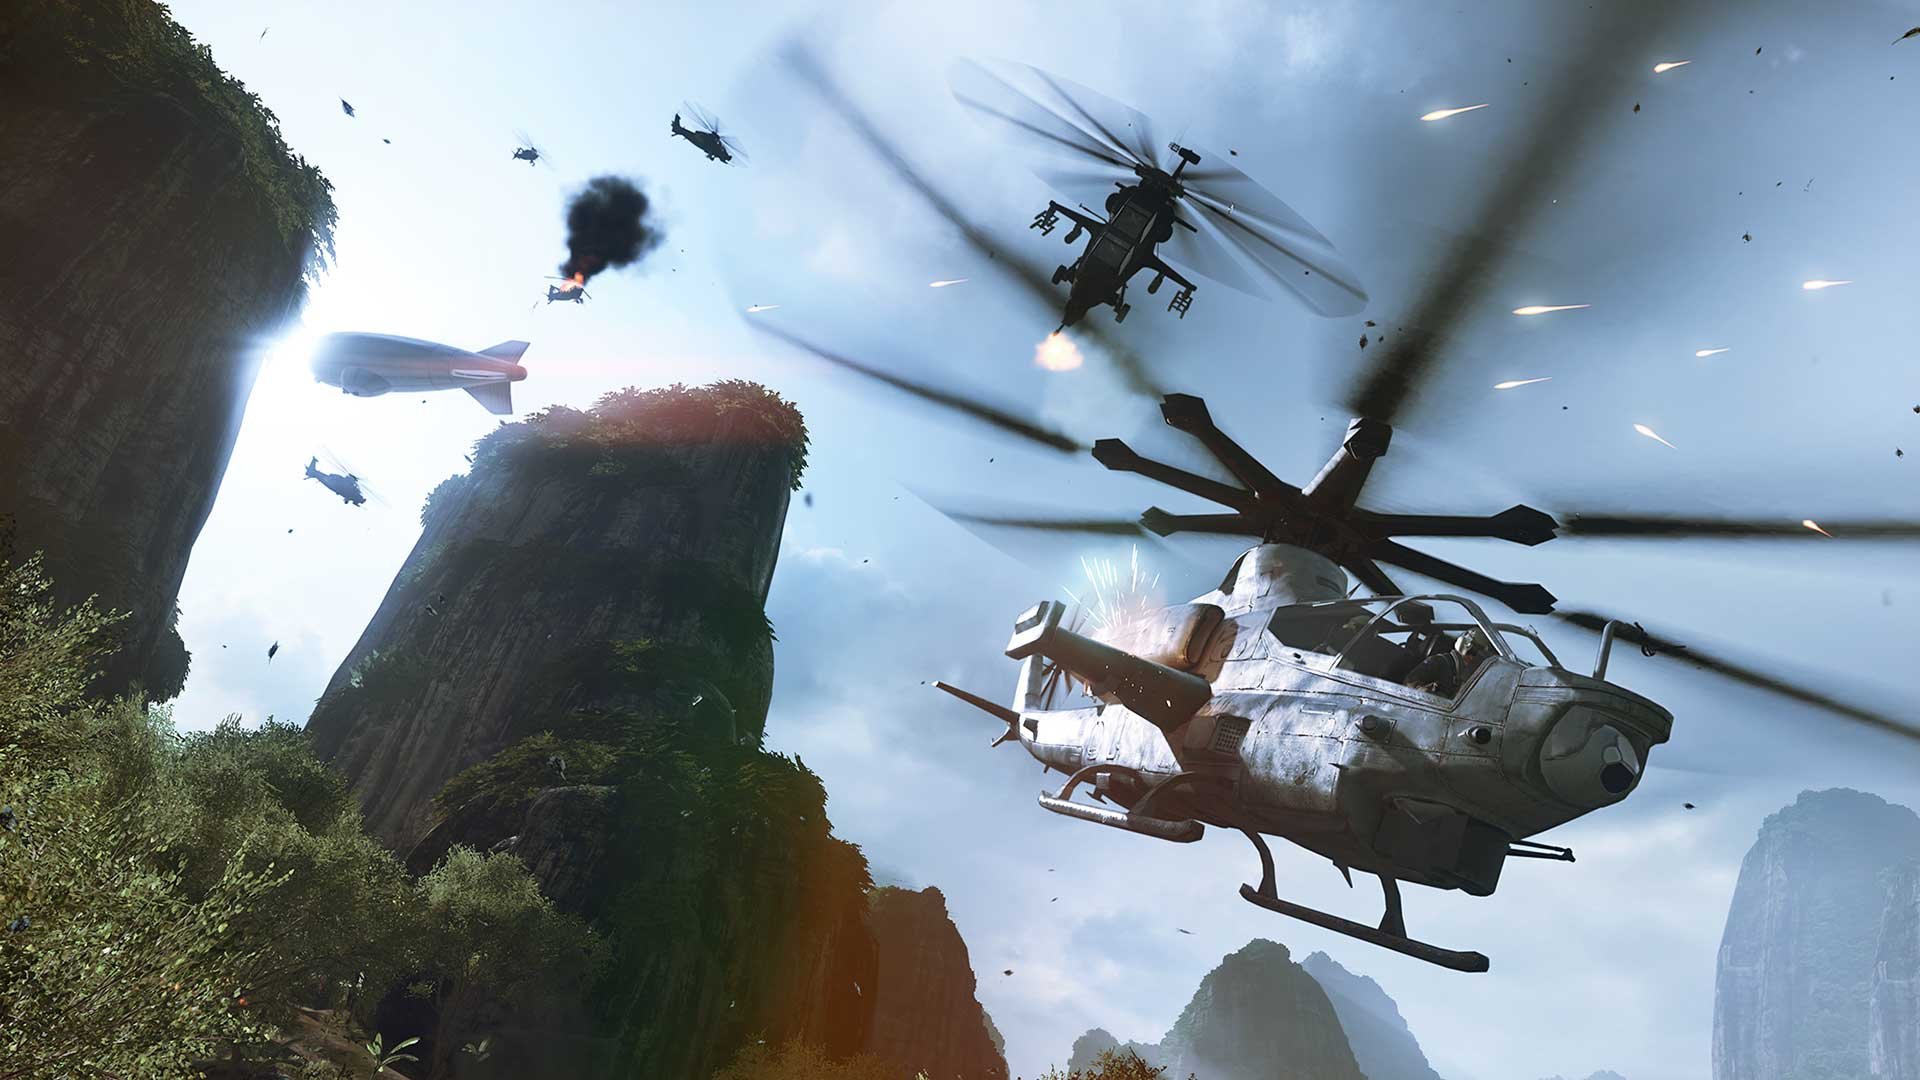 battlefield, China, Rising, Shooter, Tactical, Stealth, Action, Military, Helicopter Wallpaper